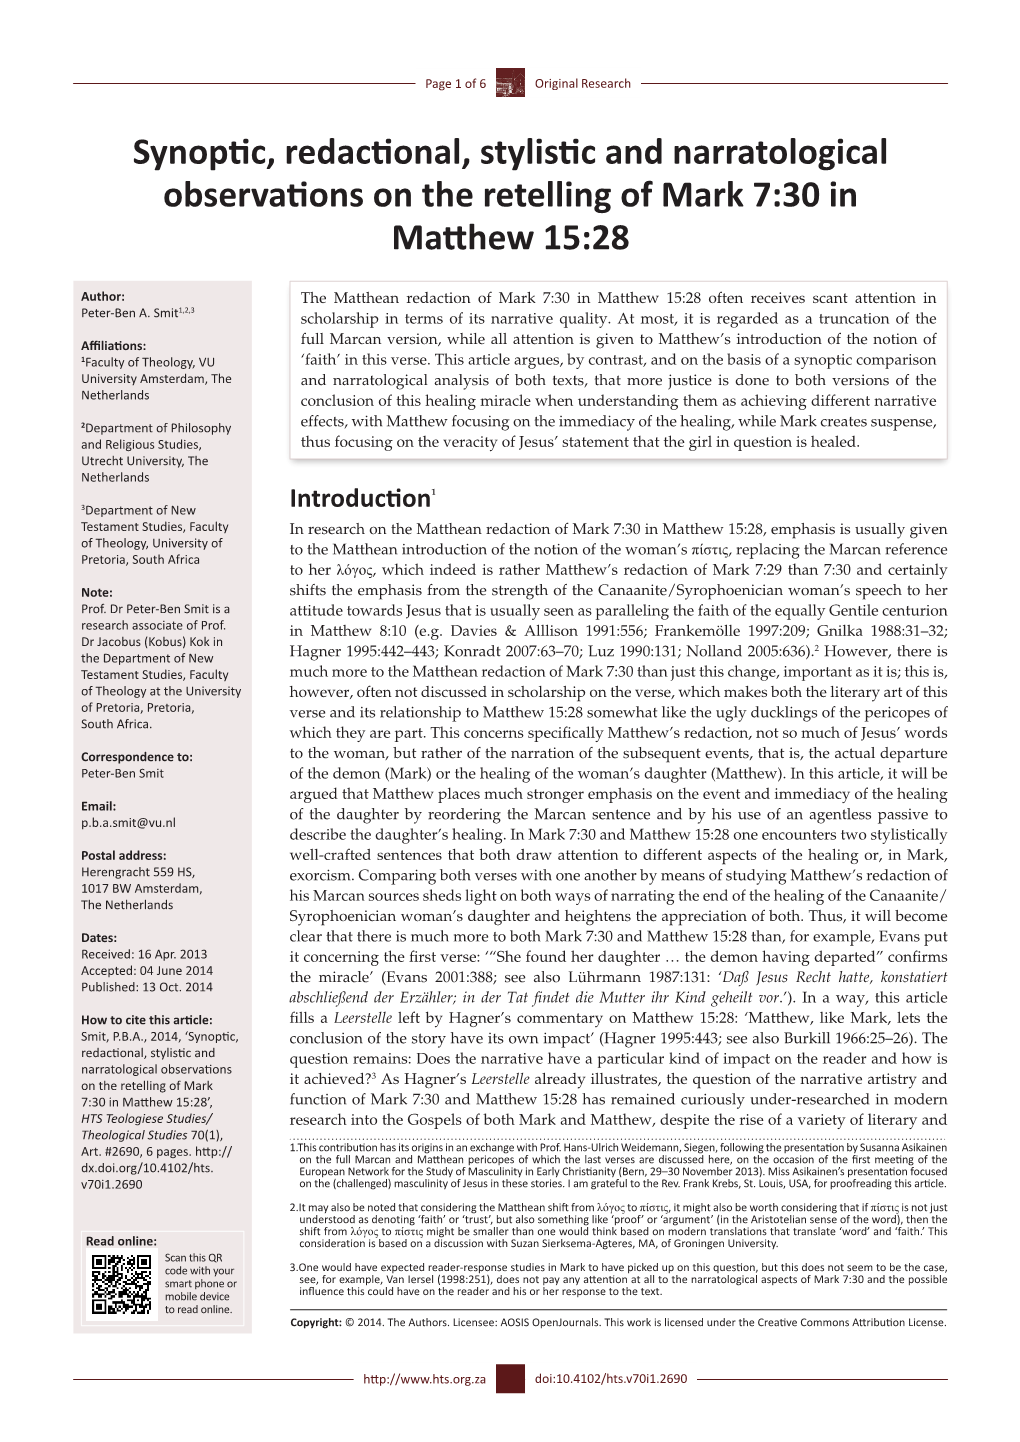 Synoptic, Redactional, Stylistic and Narratological Observations on the Retelling of Mark 7:30 in Matthew 15:28